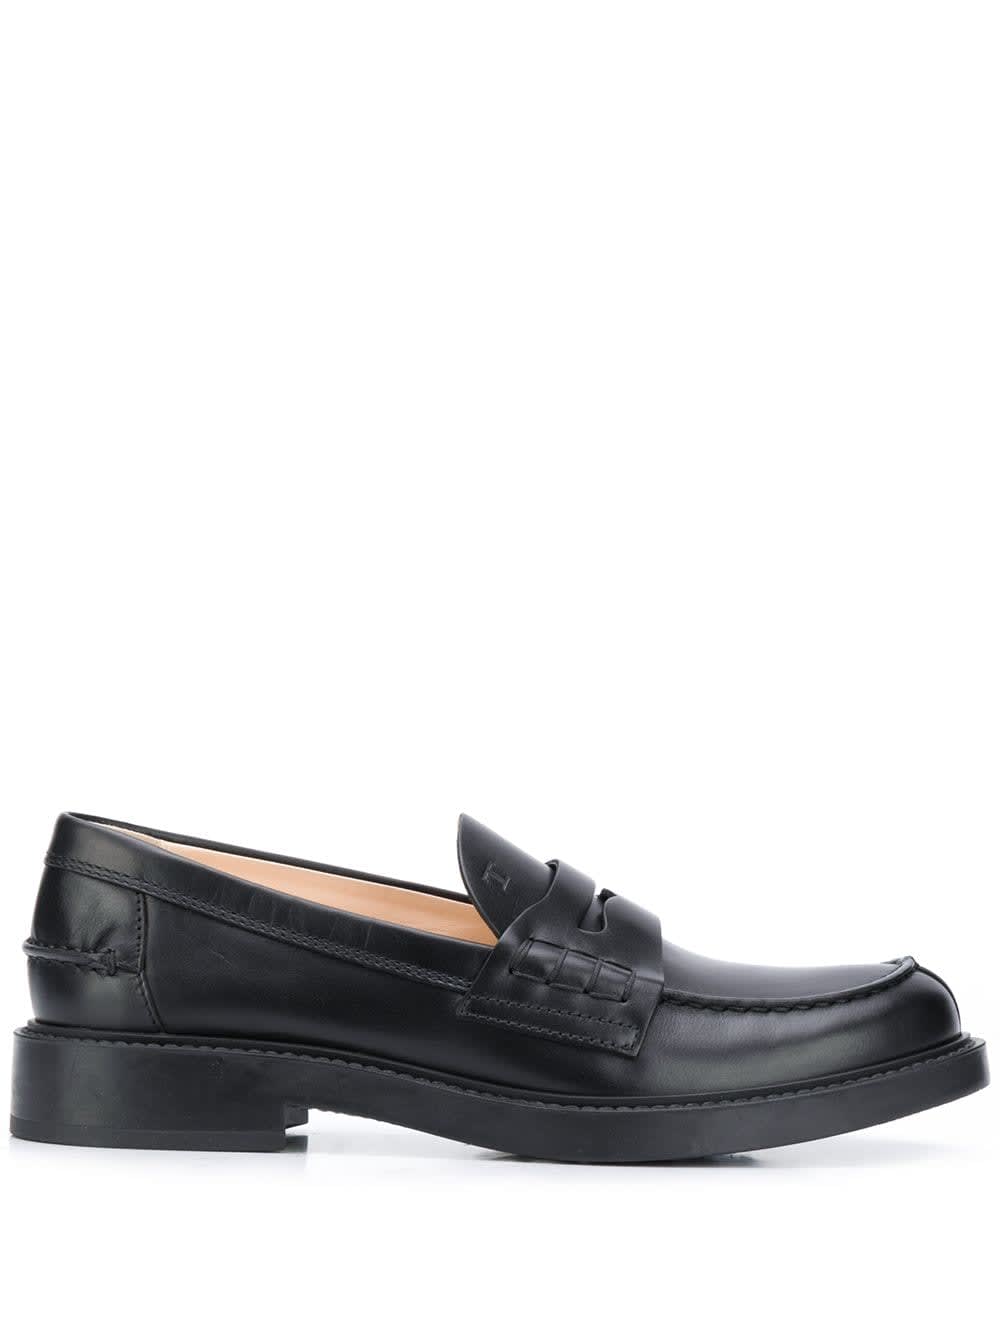 TOD'S 59C LOAFERS